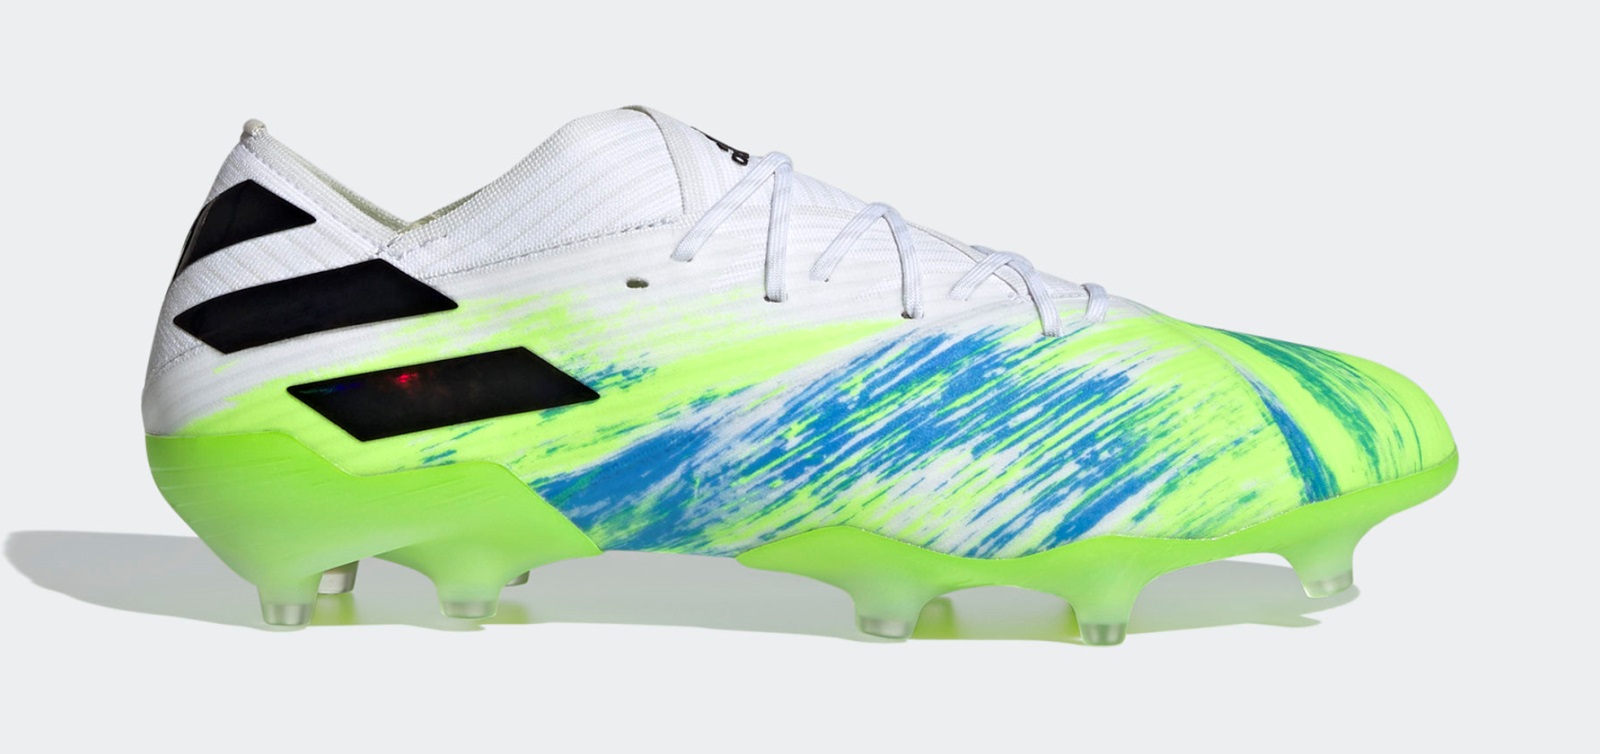 adidas messi shoes 2019